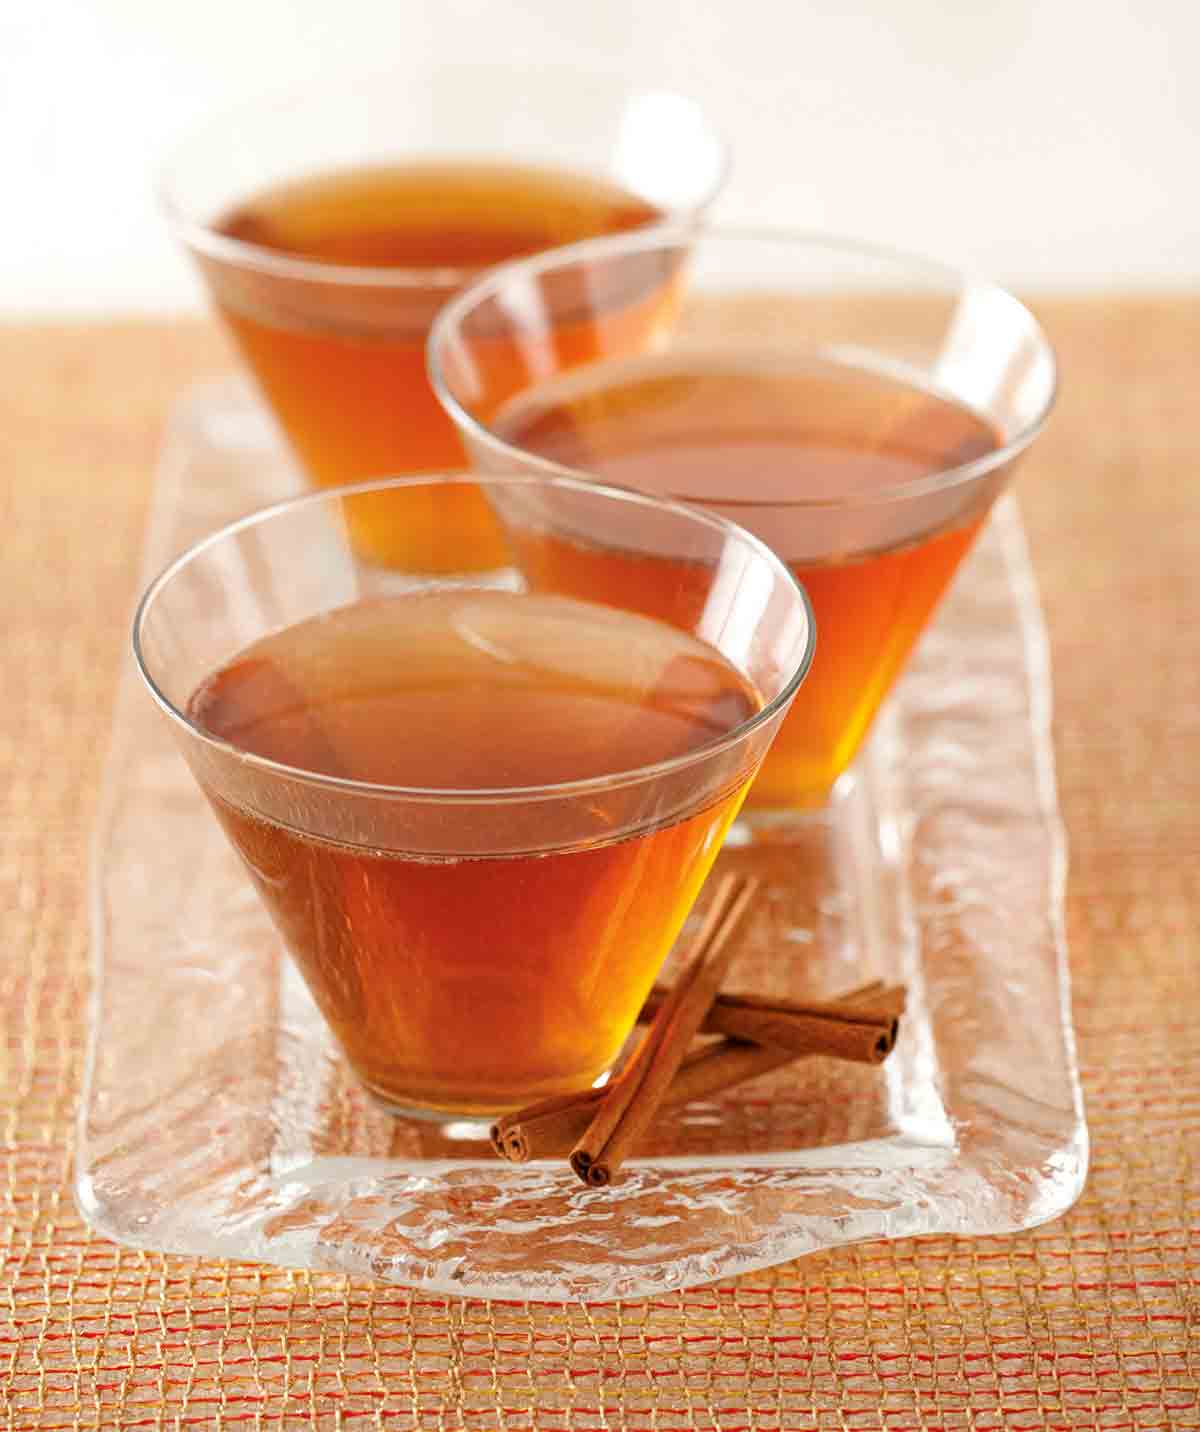 Three glasses of Maple Leaf Cocktails on a glass tray with cinnamon sticks